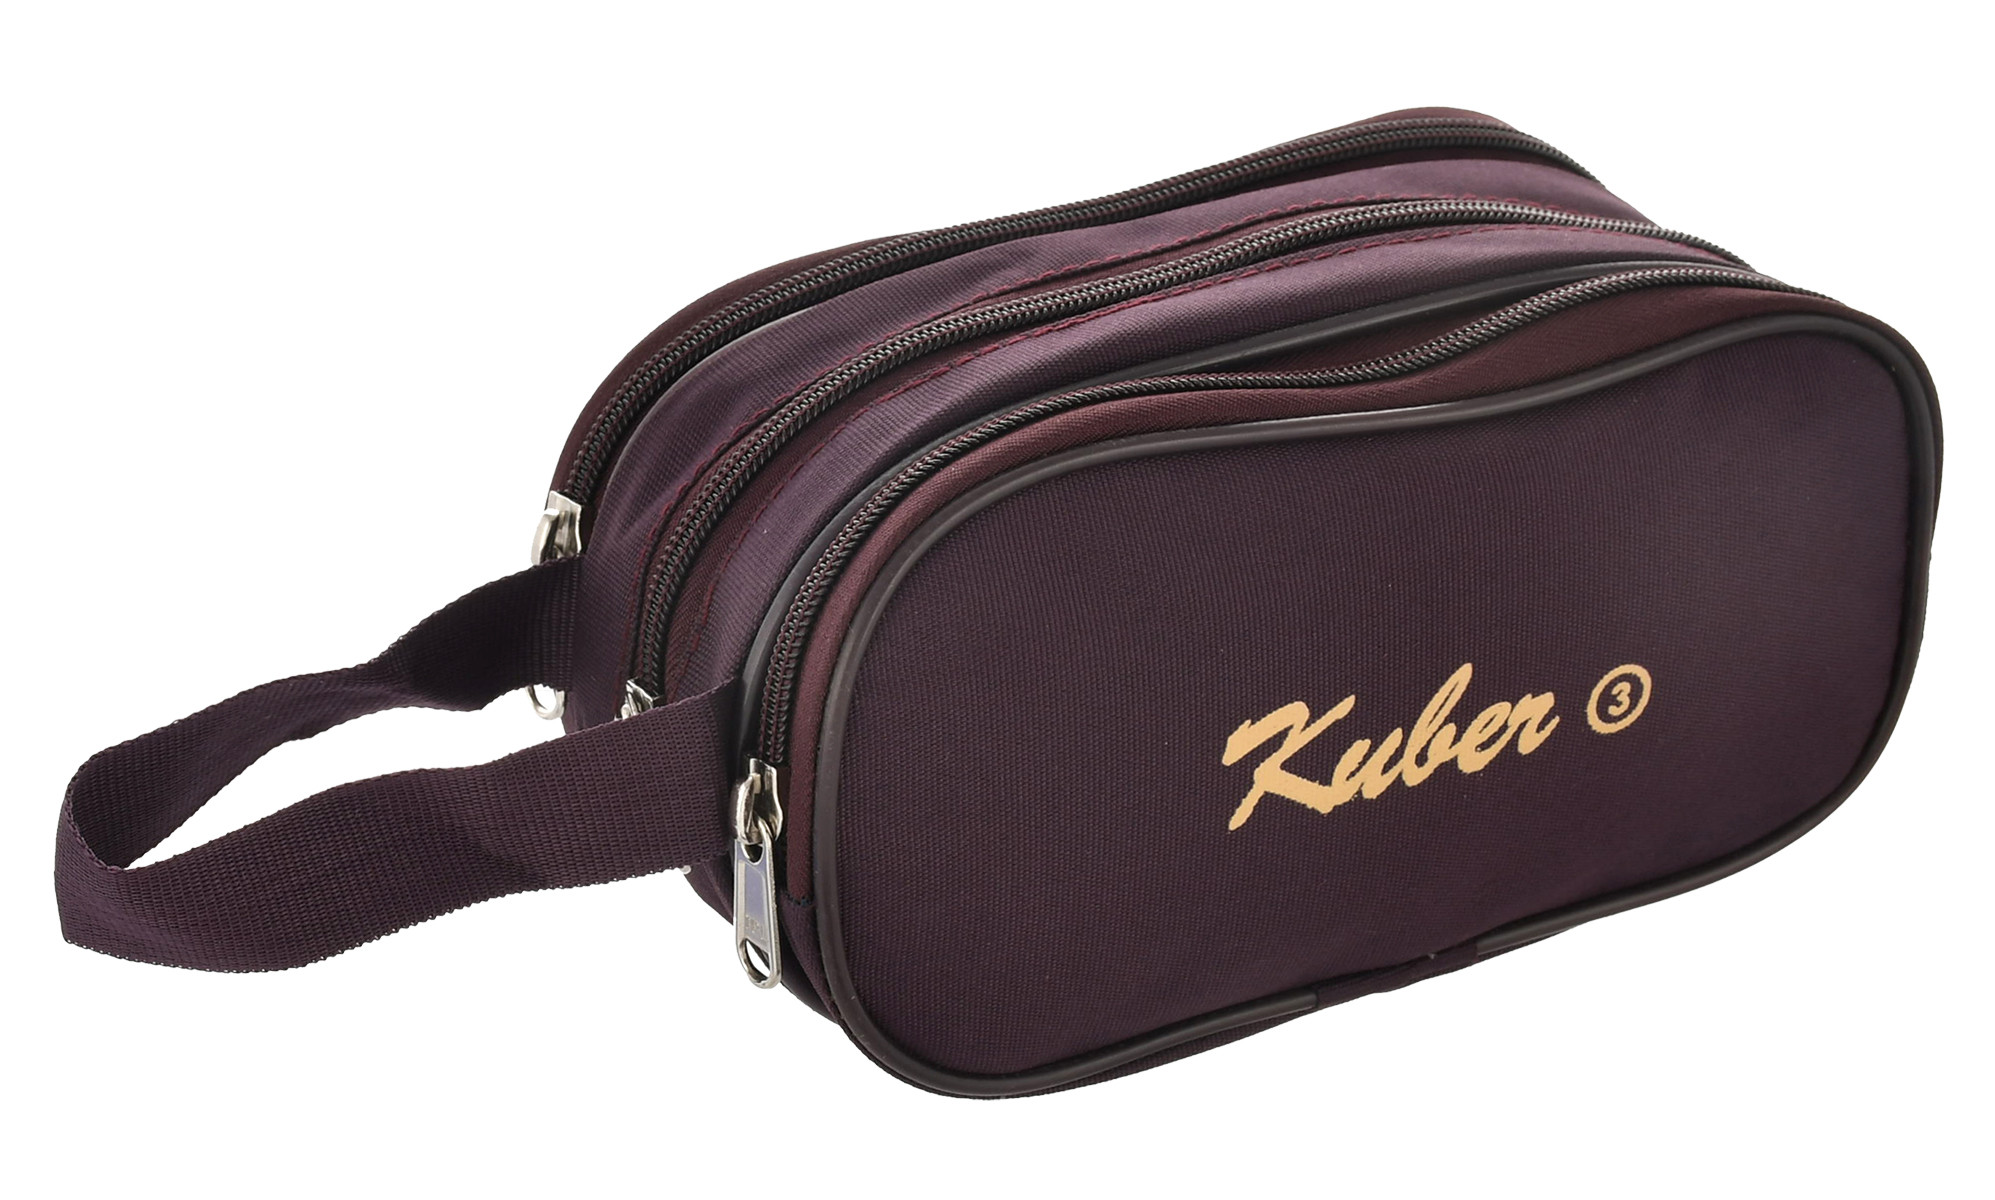 Kuber Industries Toilerty bag, Shaving Kit, Cosmetic Bag For Travel Accessories With 3 Zipper Comparments & Carrying Strip (Maroon)-HS43KUBMART26615